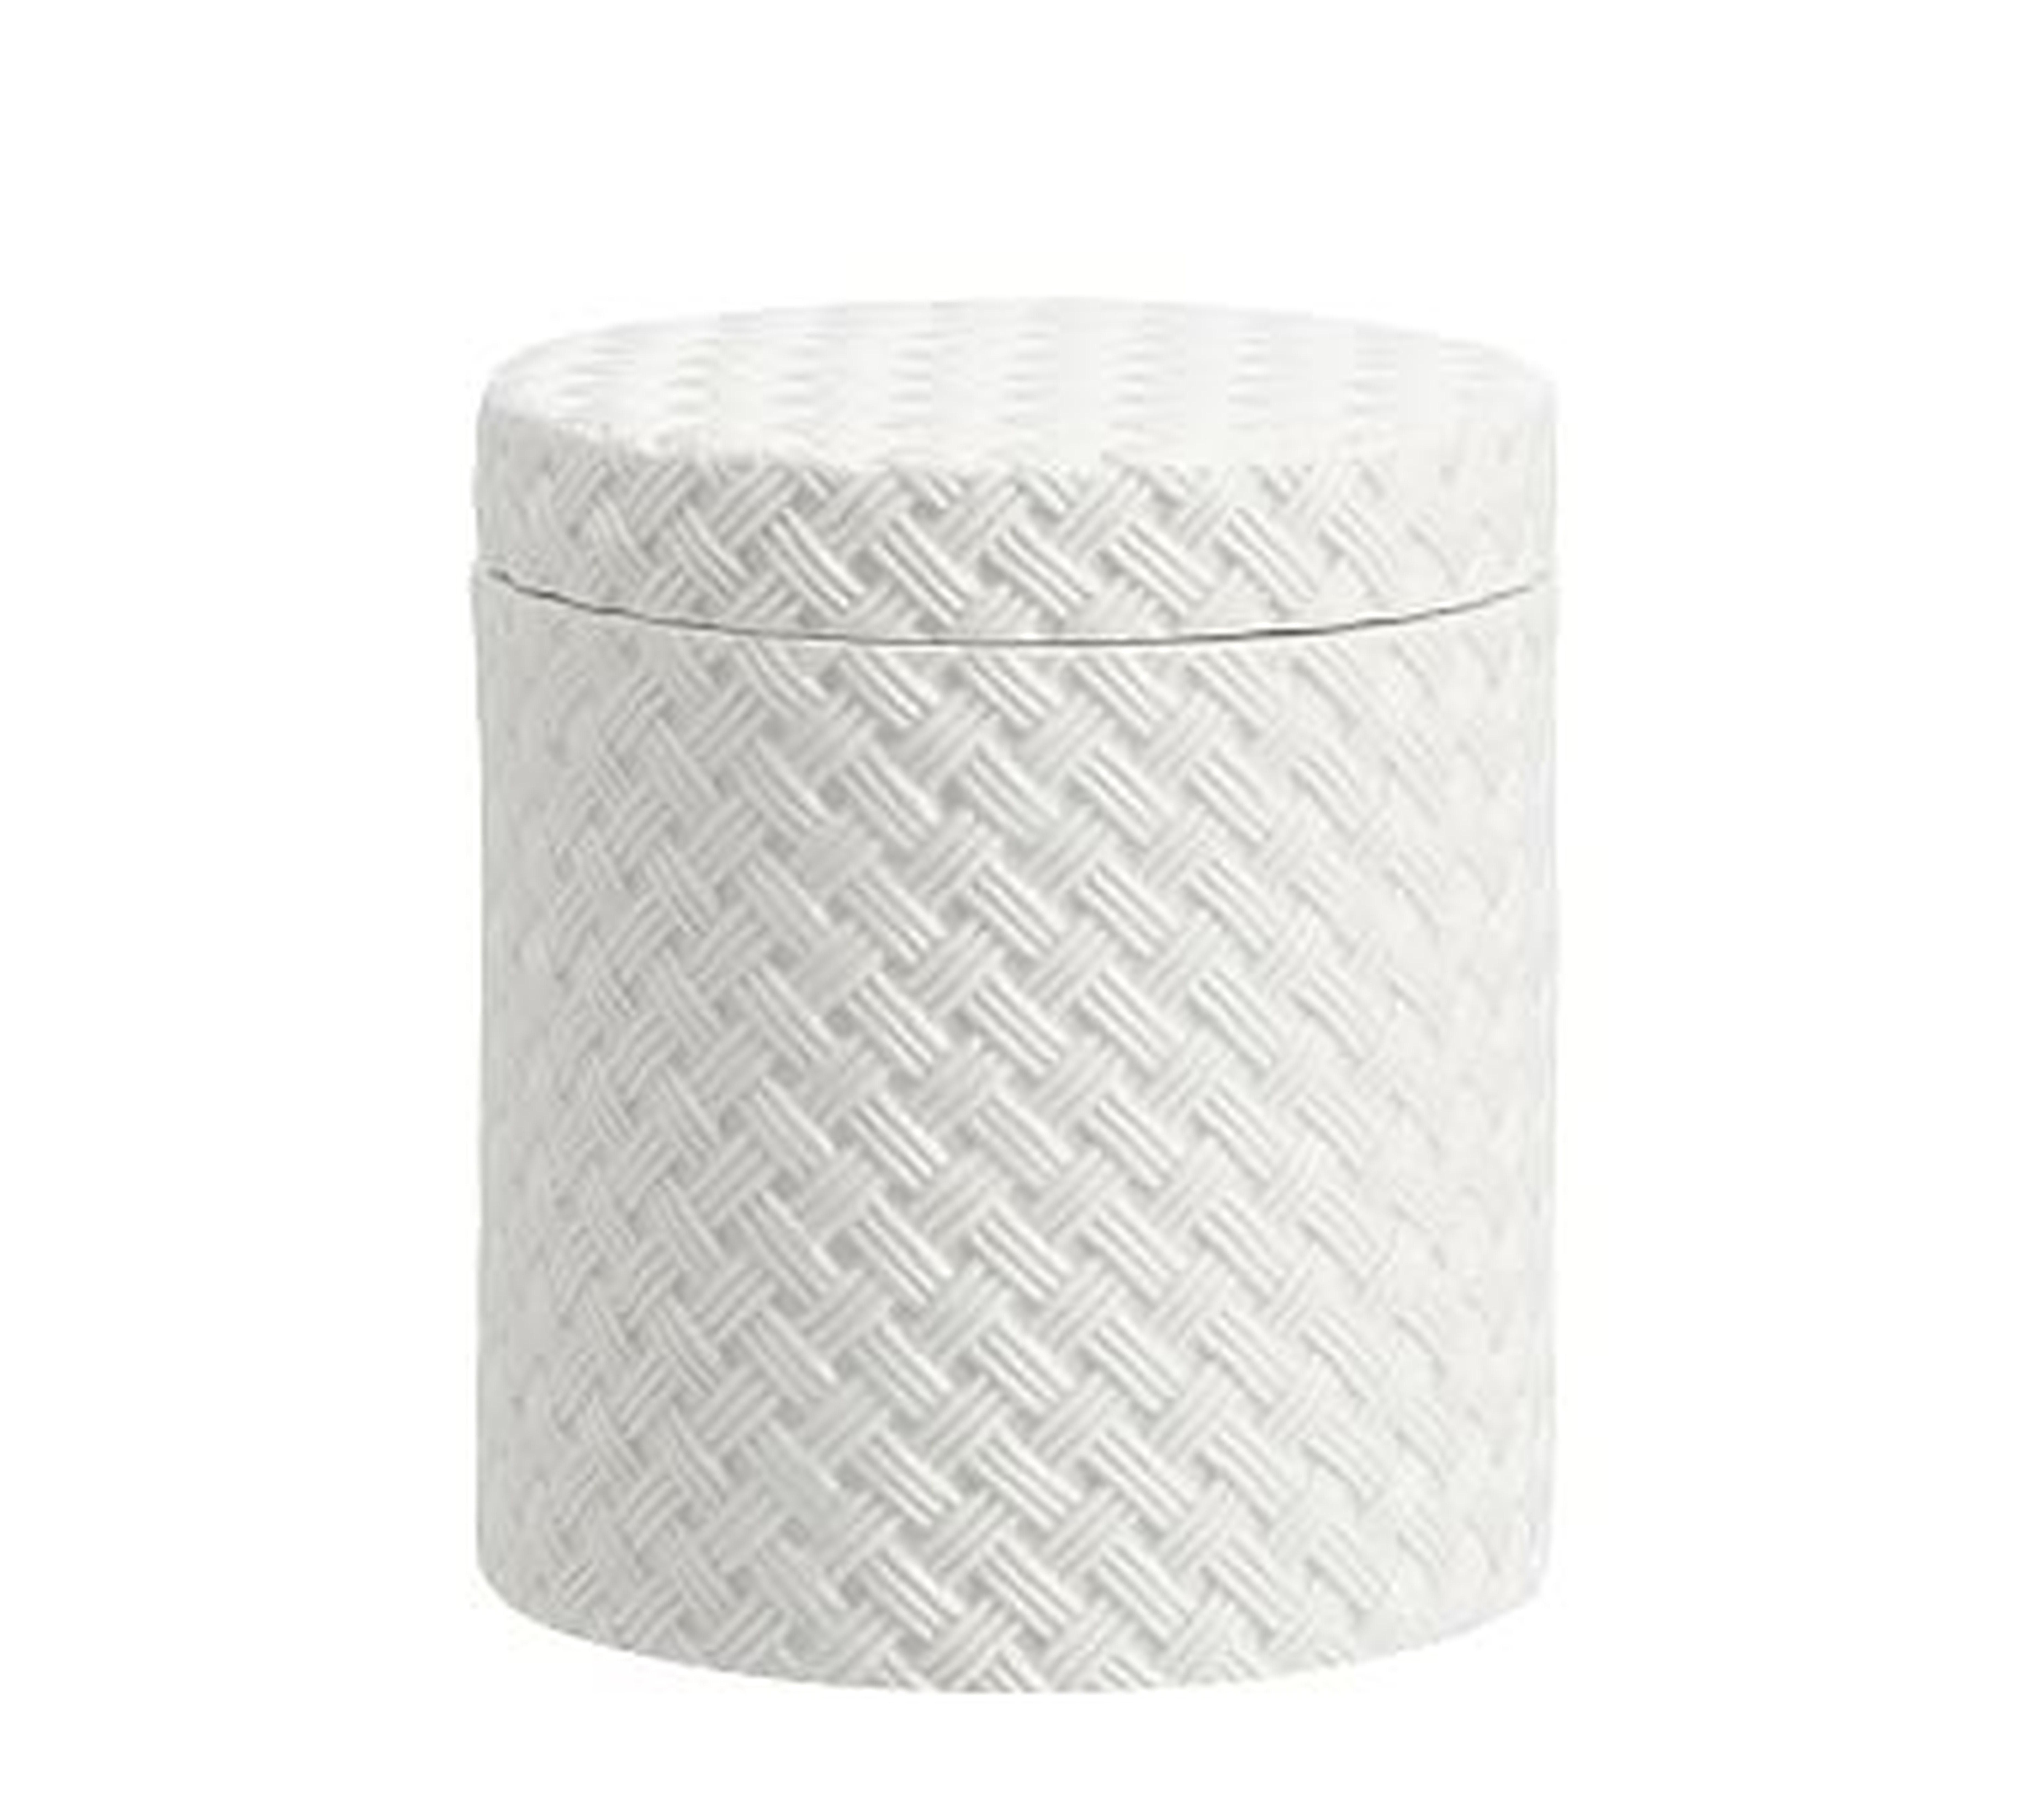 Porcelain Basketweave Accessories, Large Canister, White - Pottery Barn